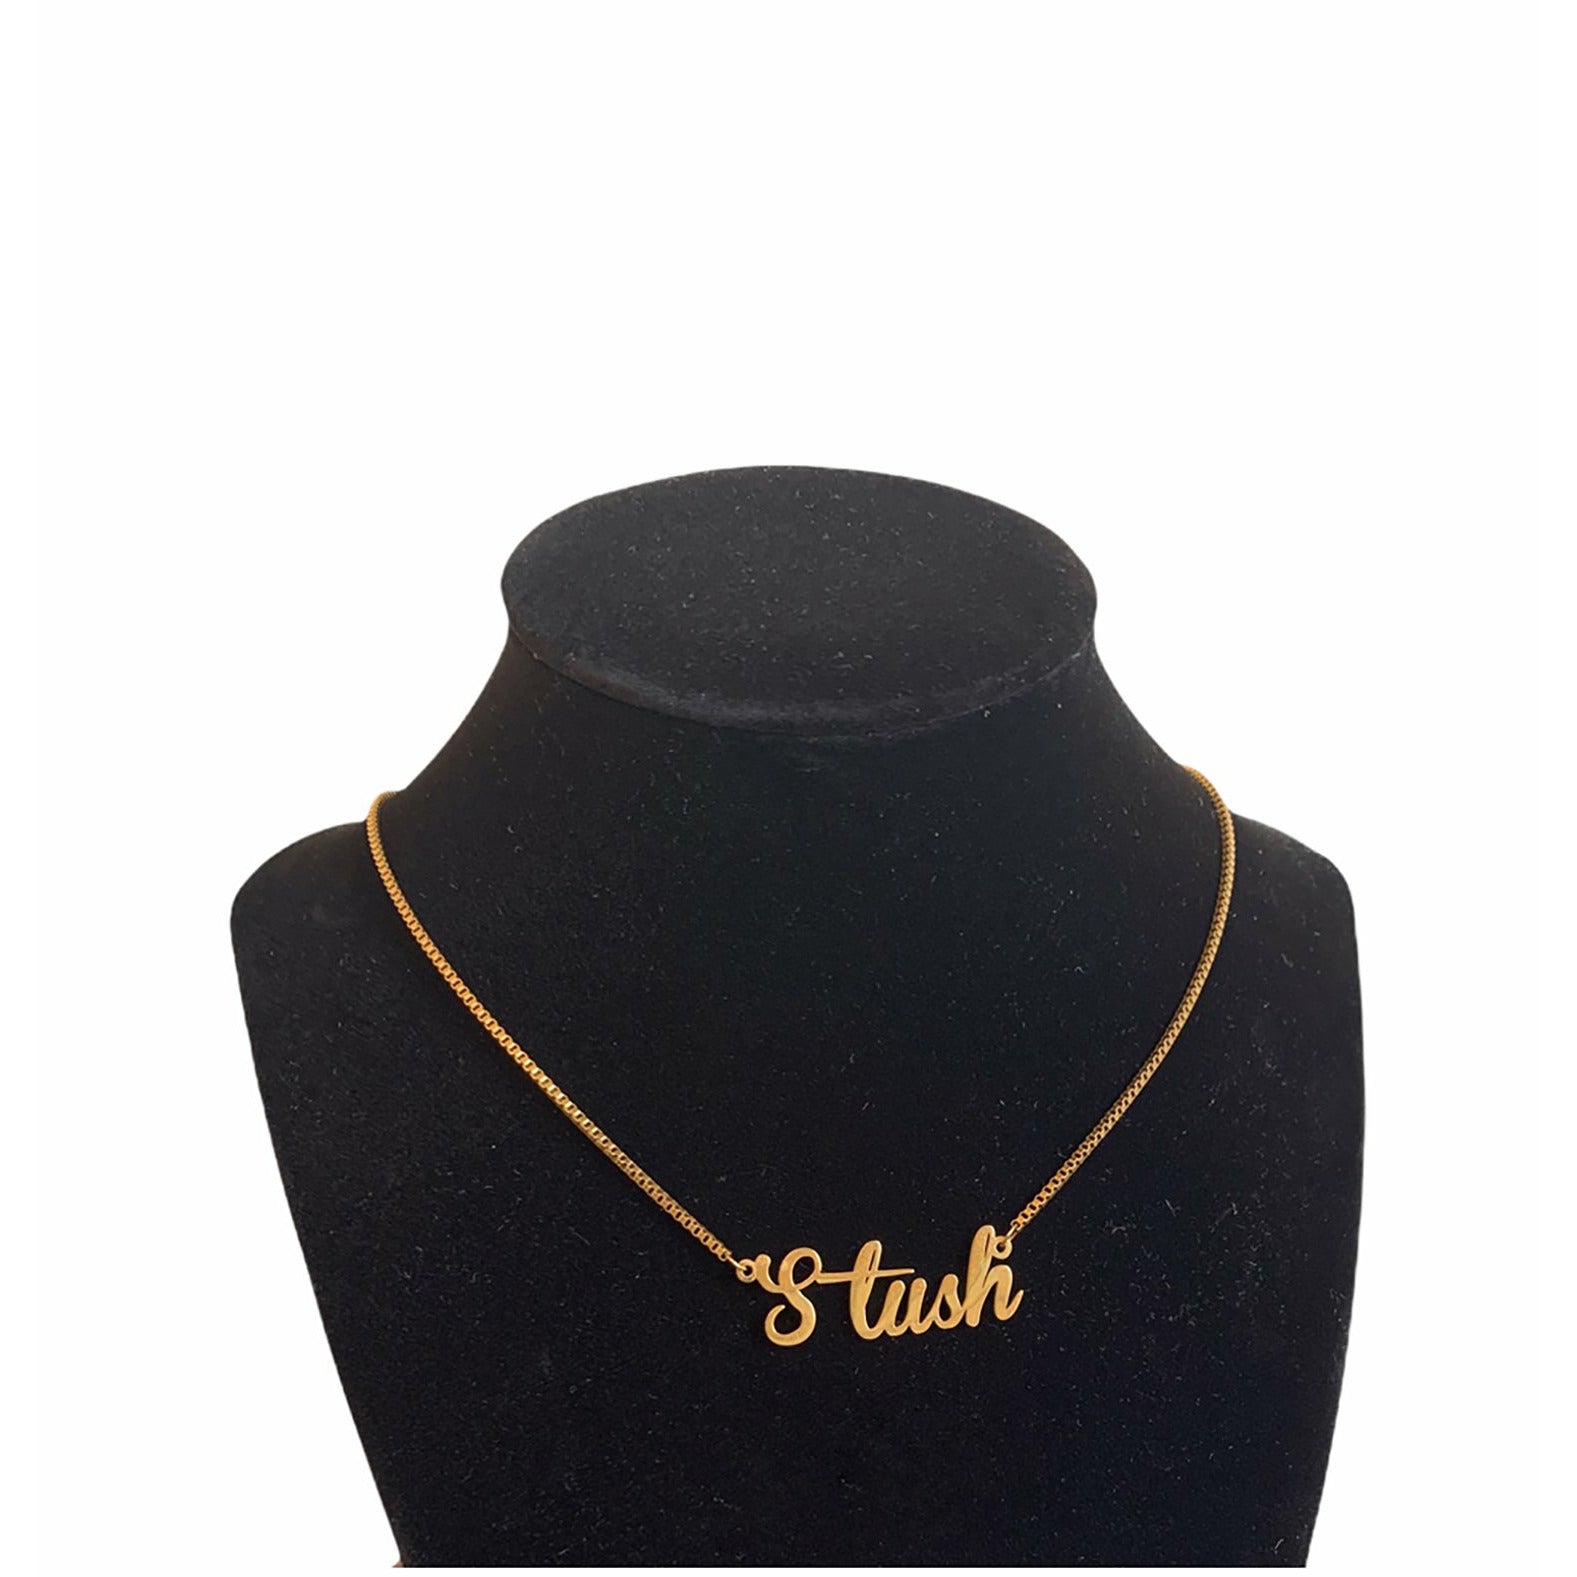 AS IS- Stush Nameplate Necklace